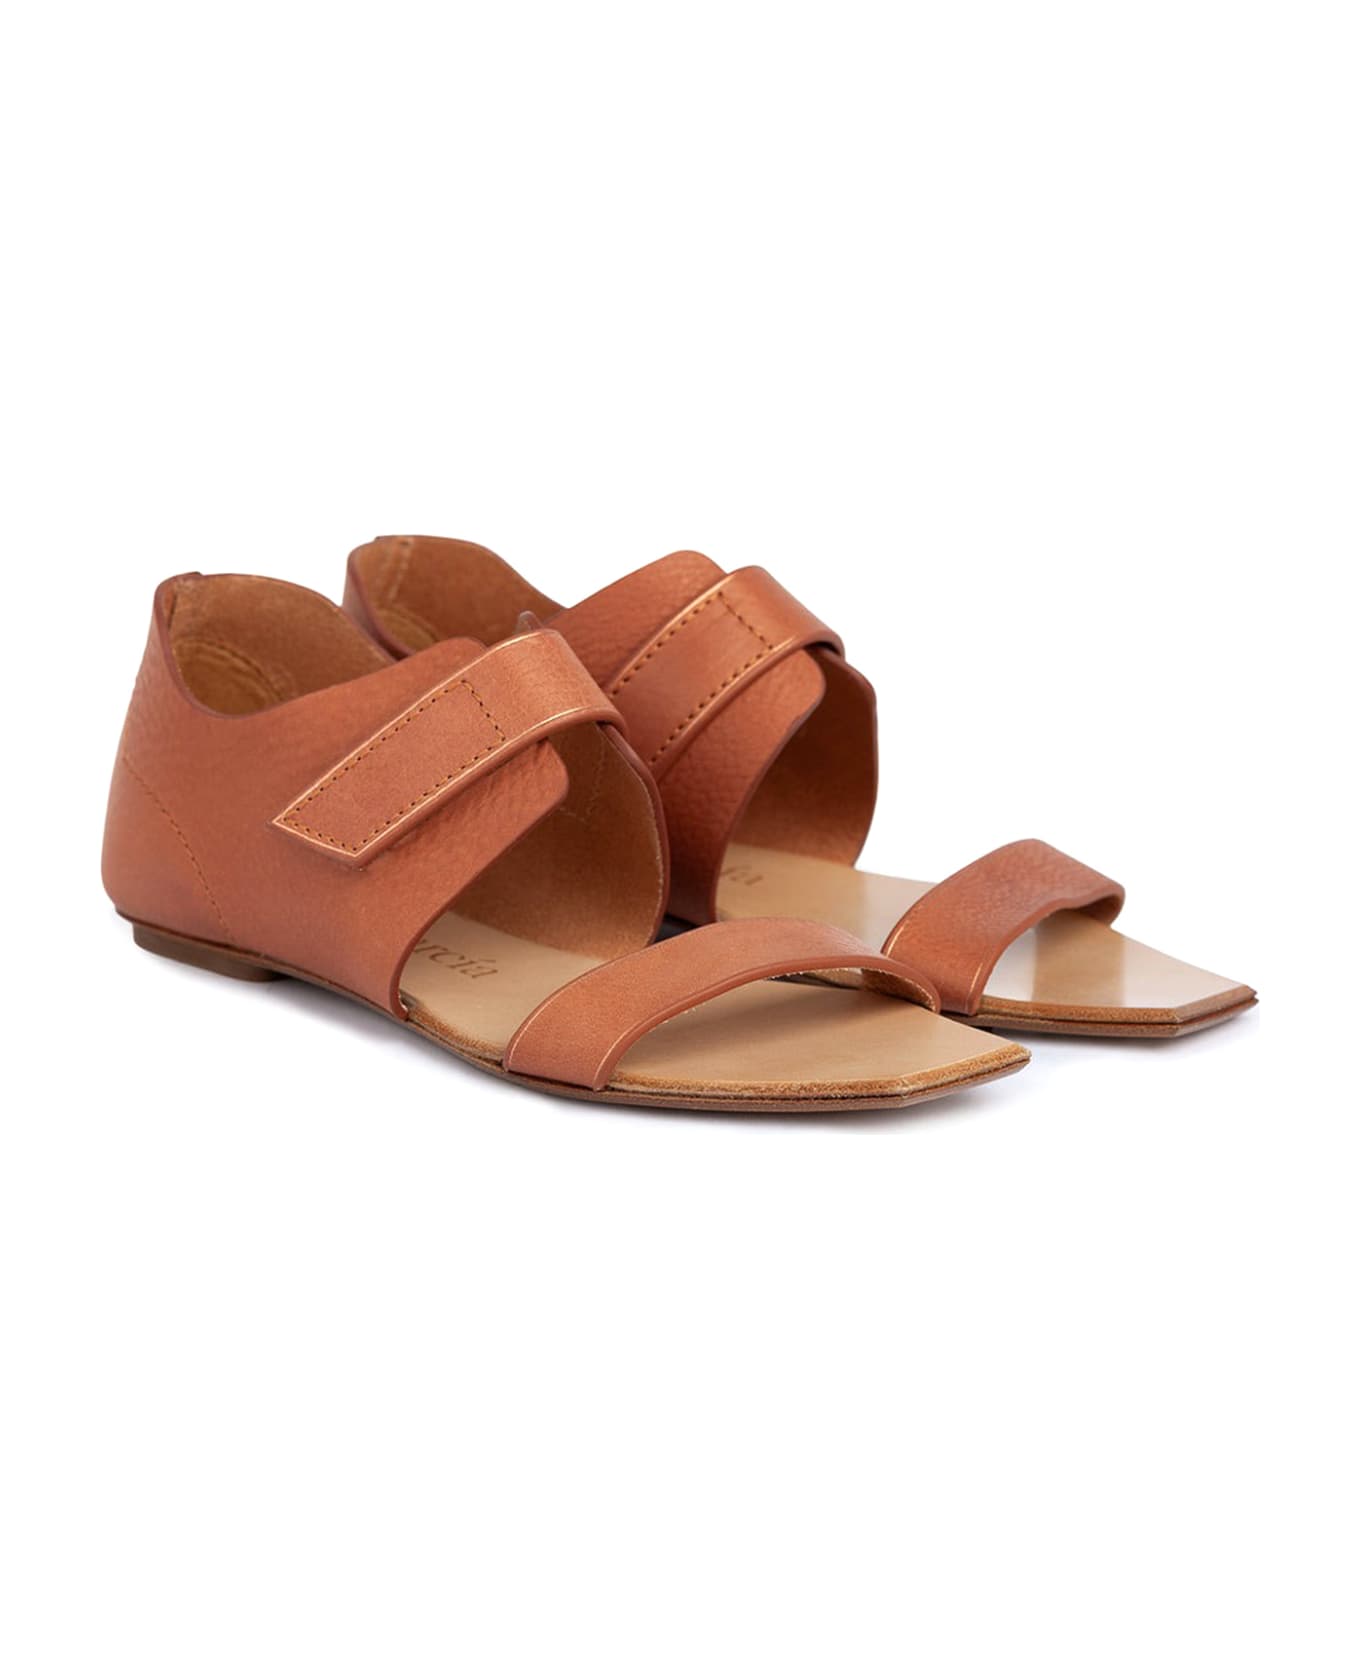 Pedro Garcia Vivi Flat Sandal In Tanned Leather - Clay